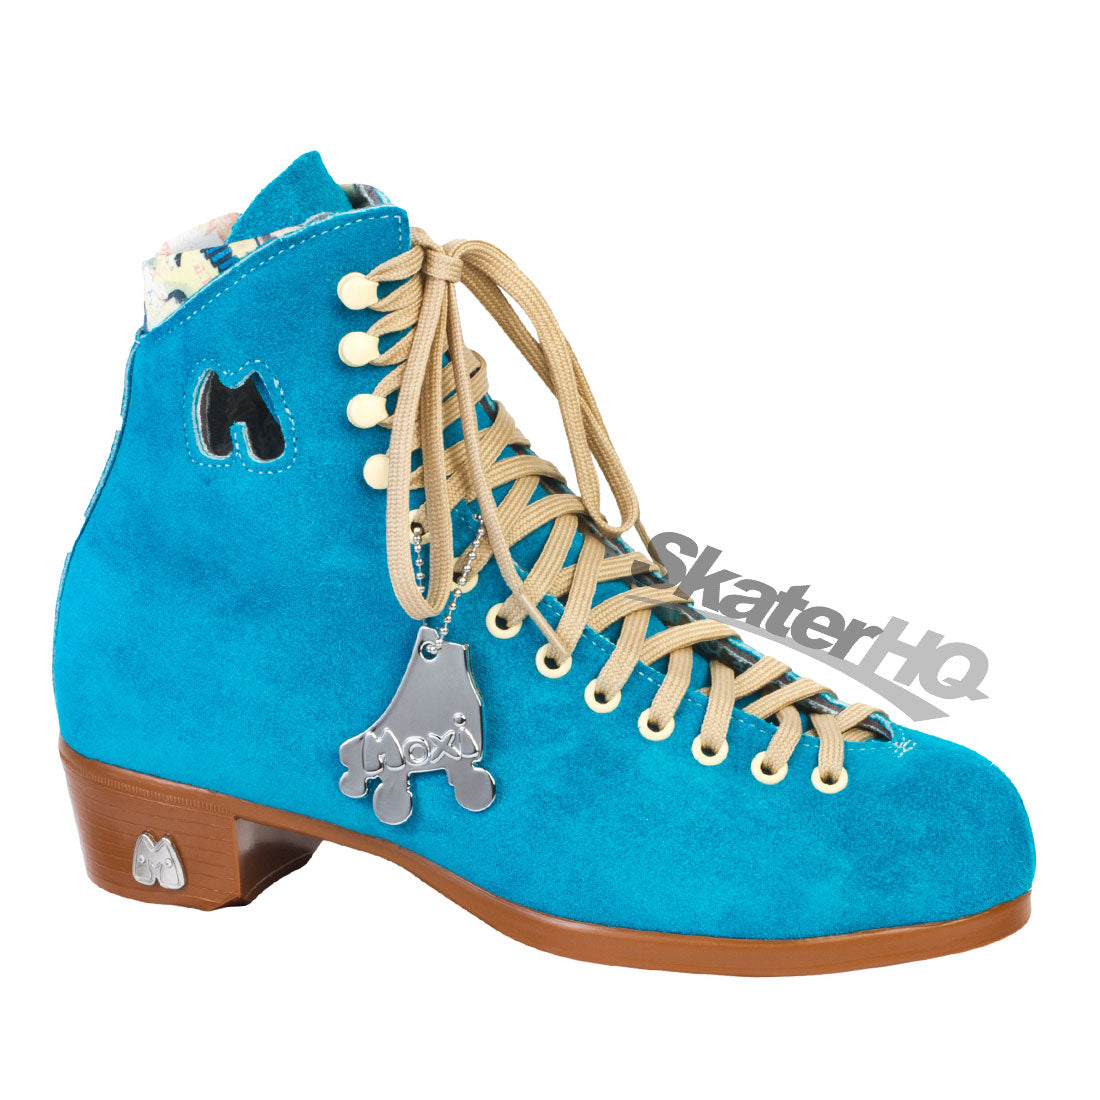 Moxi Lolly Boot - Pool Blue Roller Skate Boots